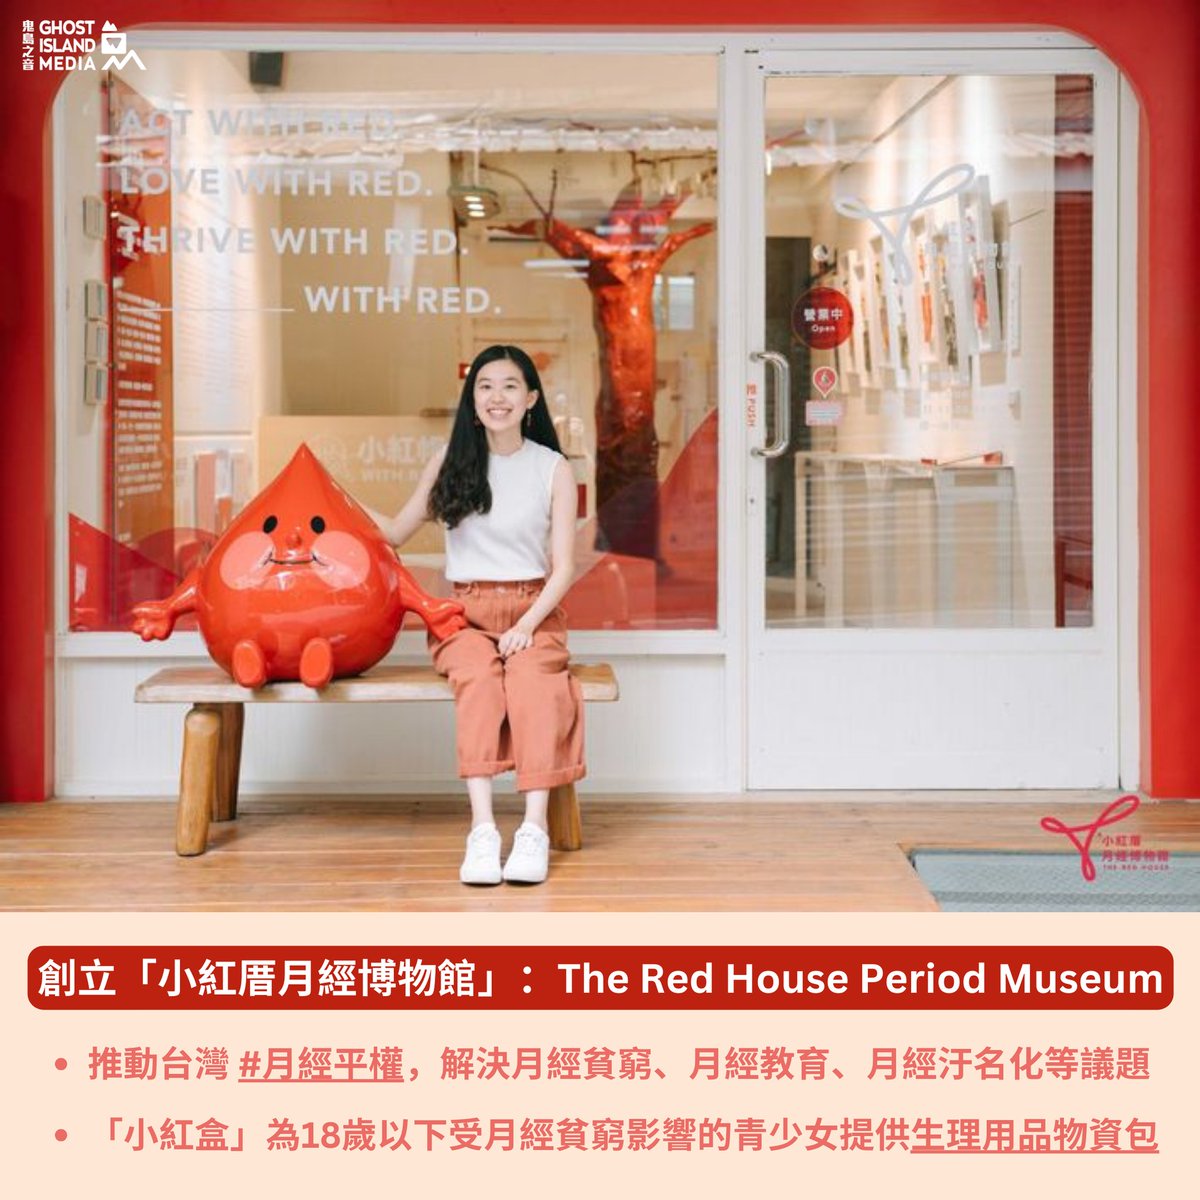 Happy 4th birthday to With Red🩸! @vivilin_taiwan's NGO has not only helped #Taiwan become the first country in Asia to provide free menstrual products in #schools nationwide (starting this August), @periodequity_tw has also launched the world's first period #museum in #Taipei.